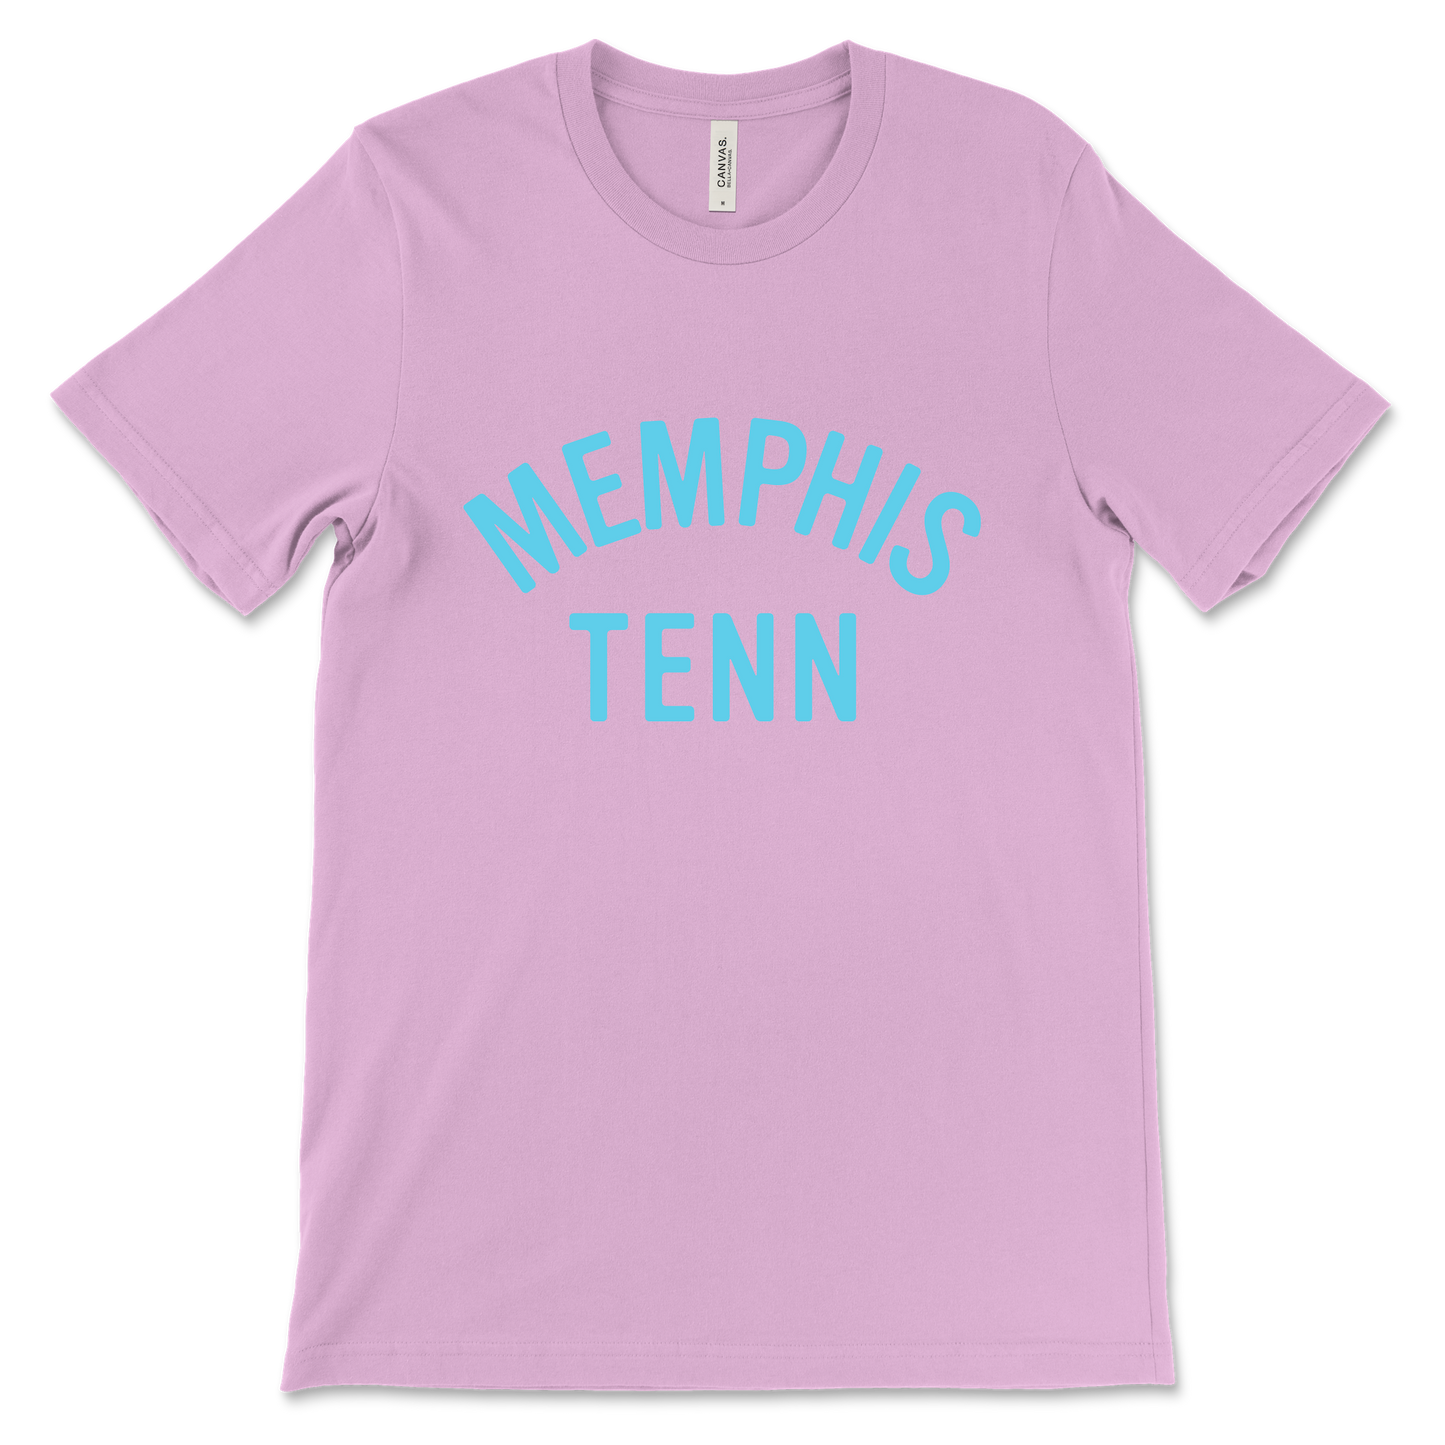 A pink MEMPHIS TENN TEE with "Choose901" printed in blue letters.